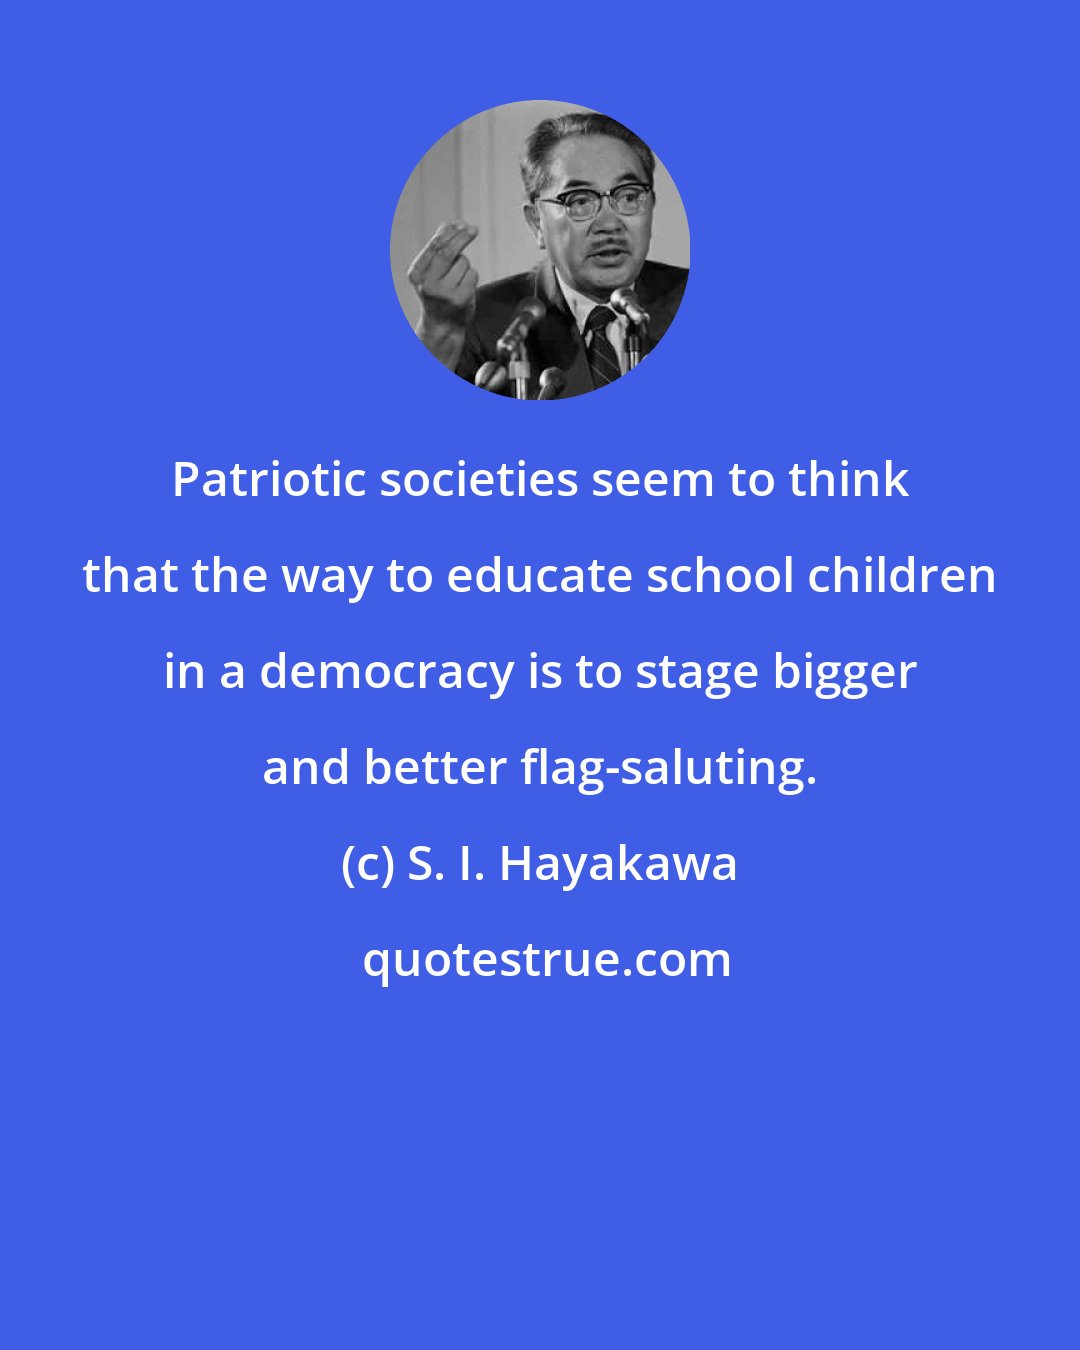 S. I. Hayakawa: Patriotic societies seem to think that the way to educate school children in a democracy is to stage bigger and better flag-saluting.